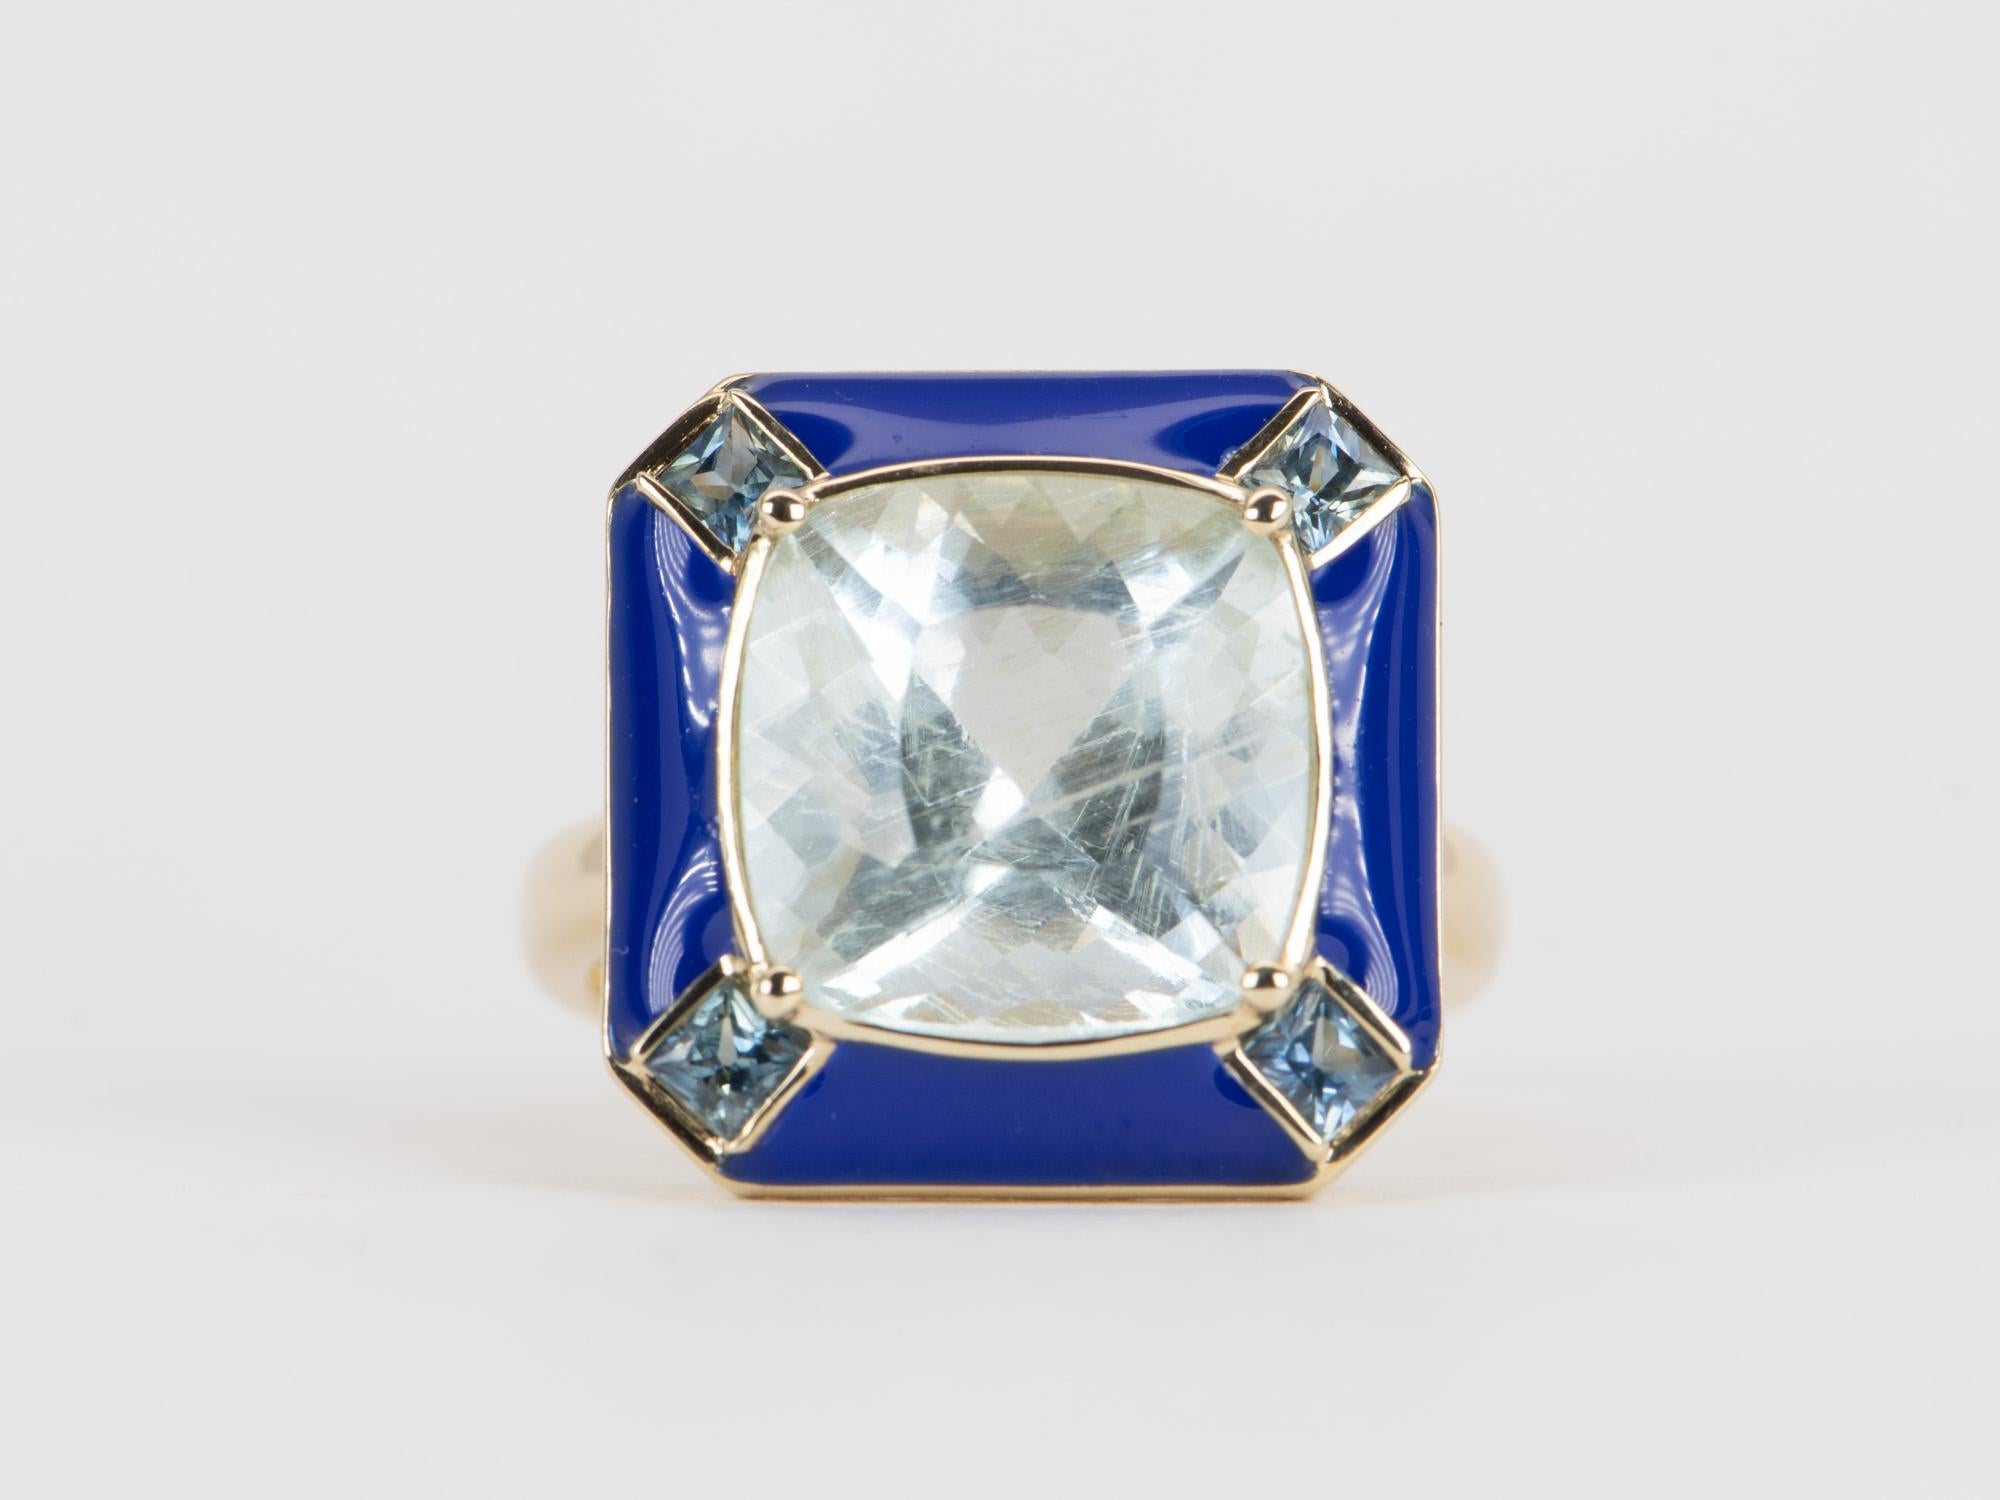 This exquisite statement ring is crafted with a unique 7.32ct Galaxy Aquamarine center and surrounded by a halo of teal sapphires and navy blue enamel. Set in 9K gold, this one-of-a-kind ring will be the perfect way to show your lasting commitment.